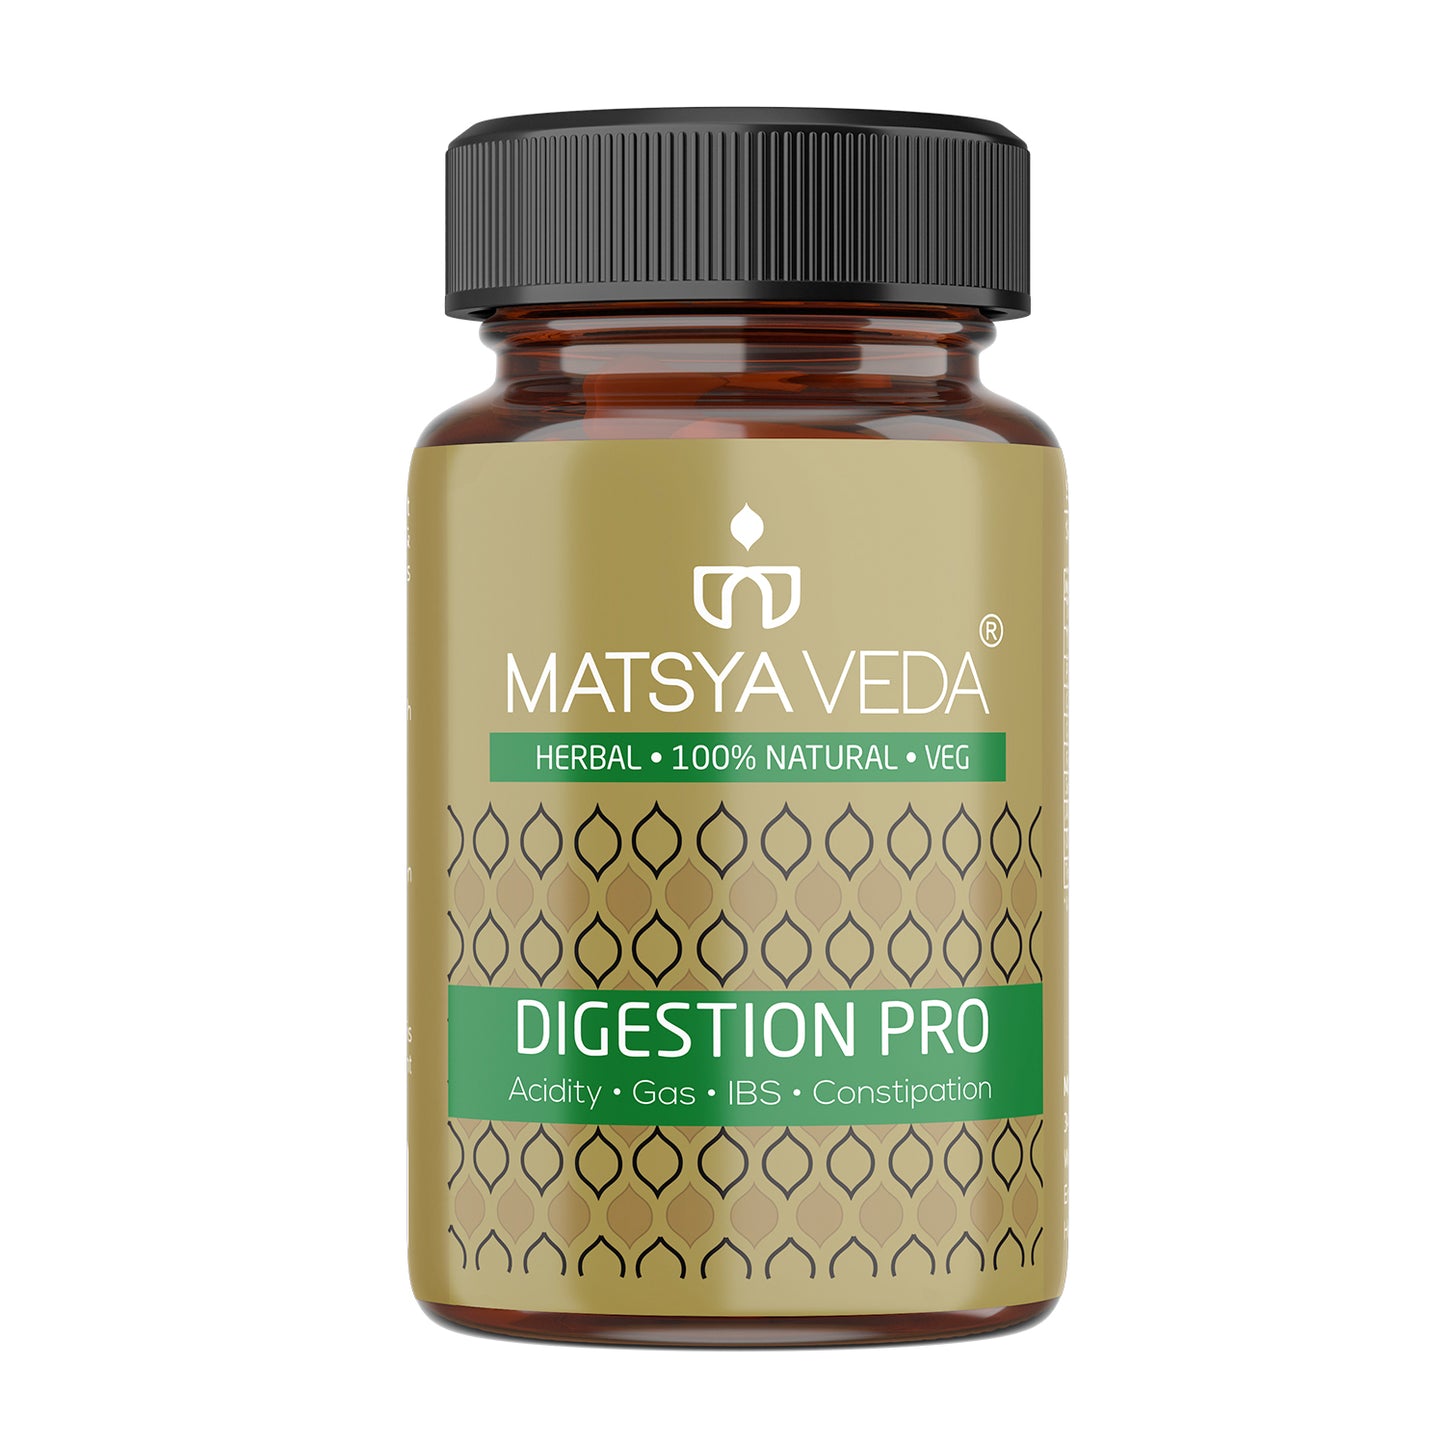 Digestion Pro Capsules: Helps with Acidity, Gas and Constipation